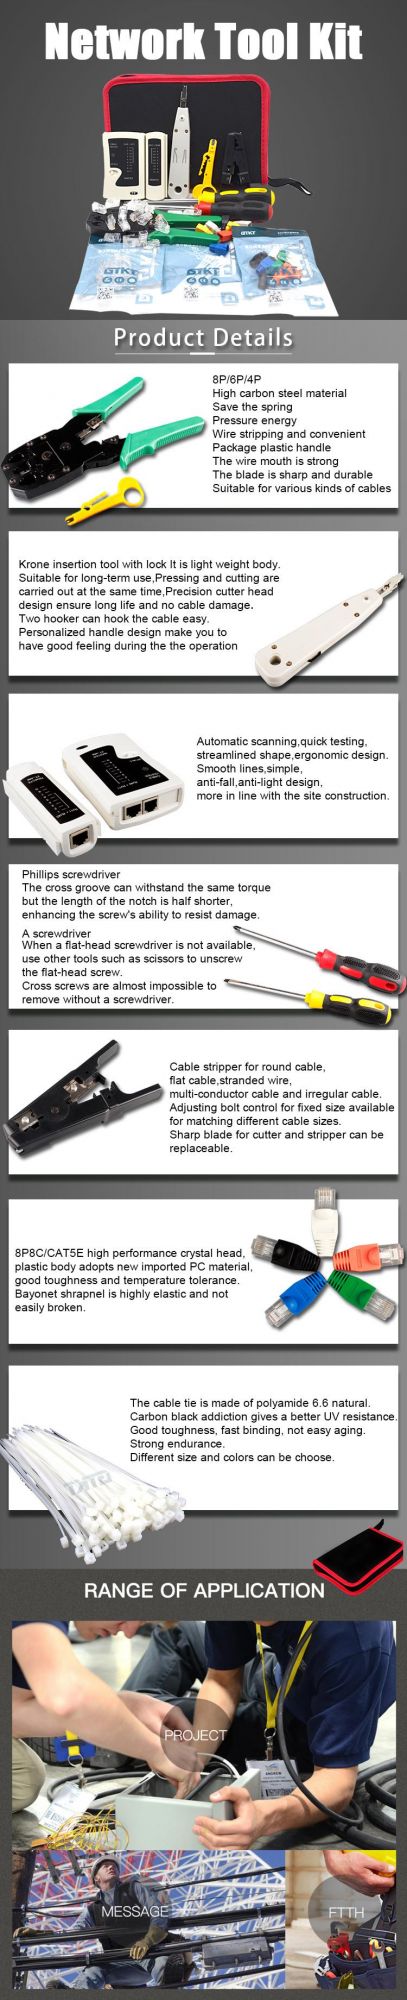 Gcabling Computer Wire Tracker Krone Insertion Tool Hand Crimping RJ45 Connector Network Tools Kit